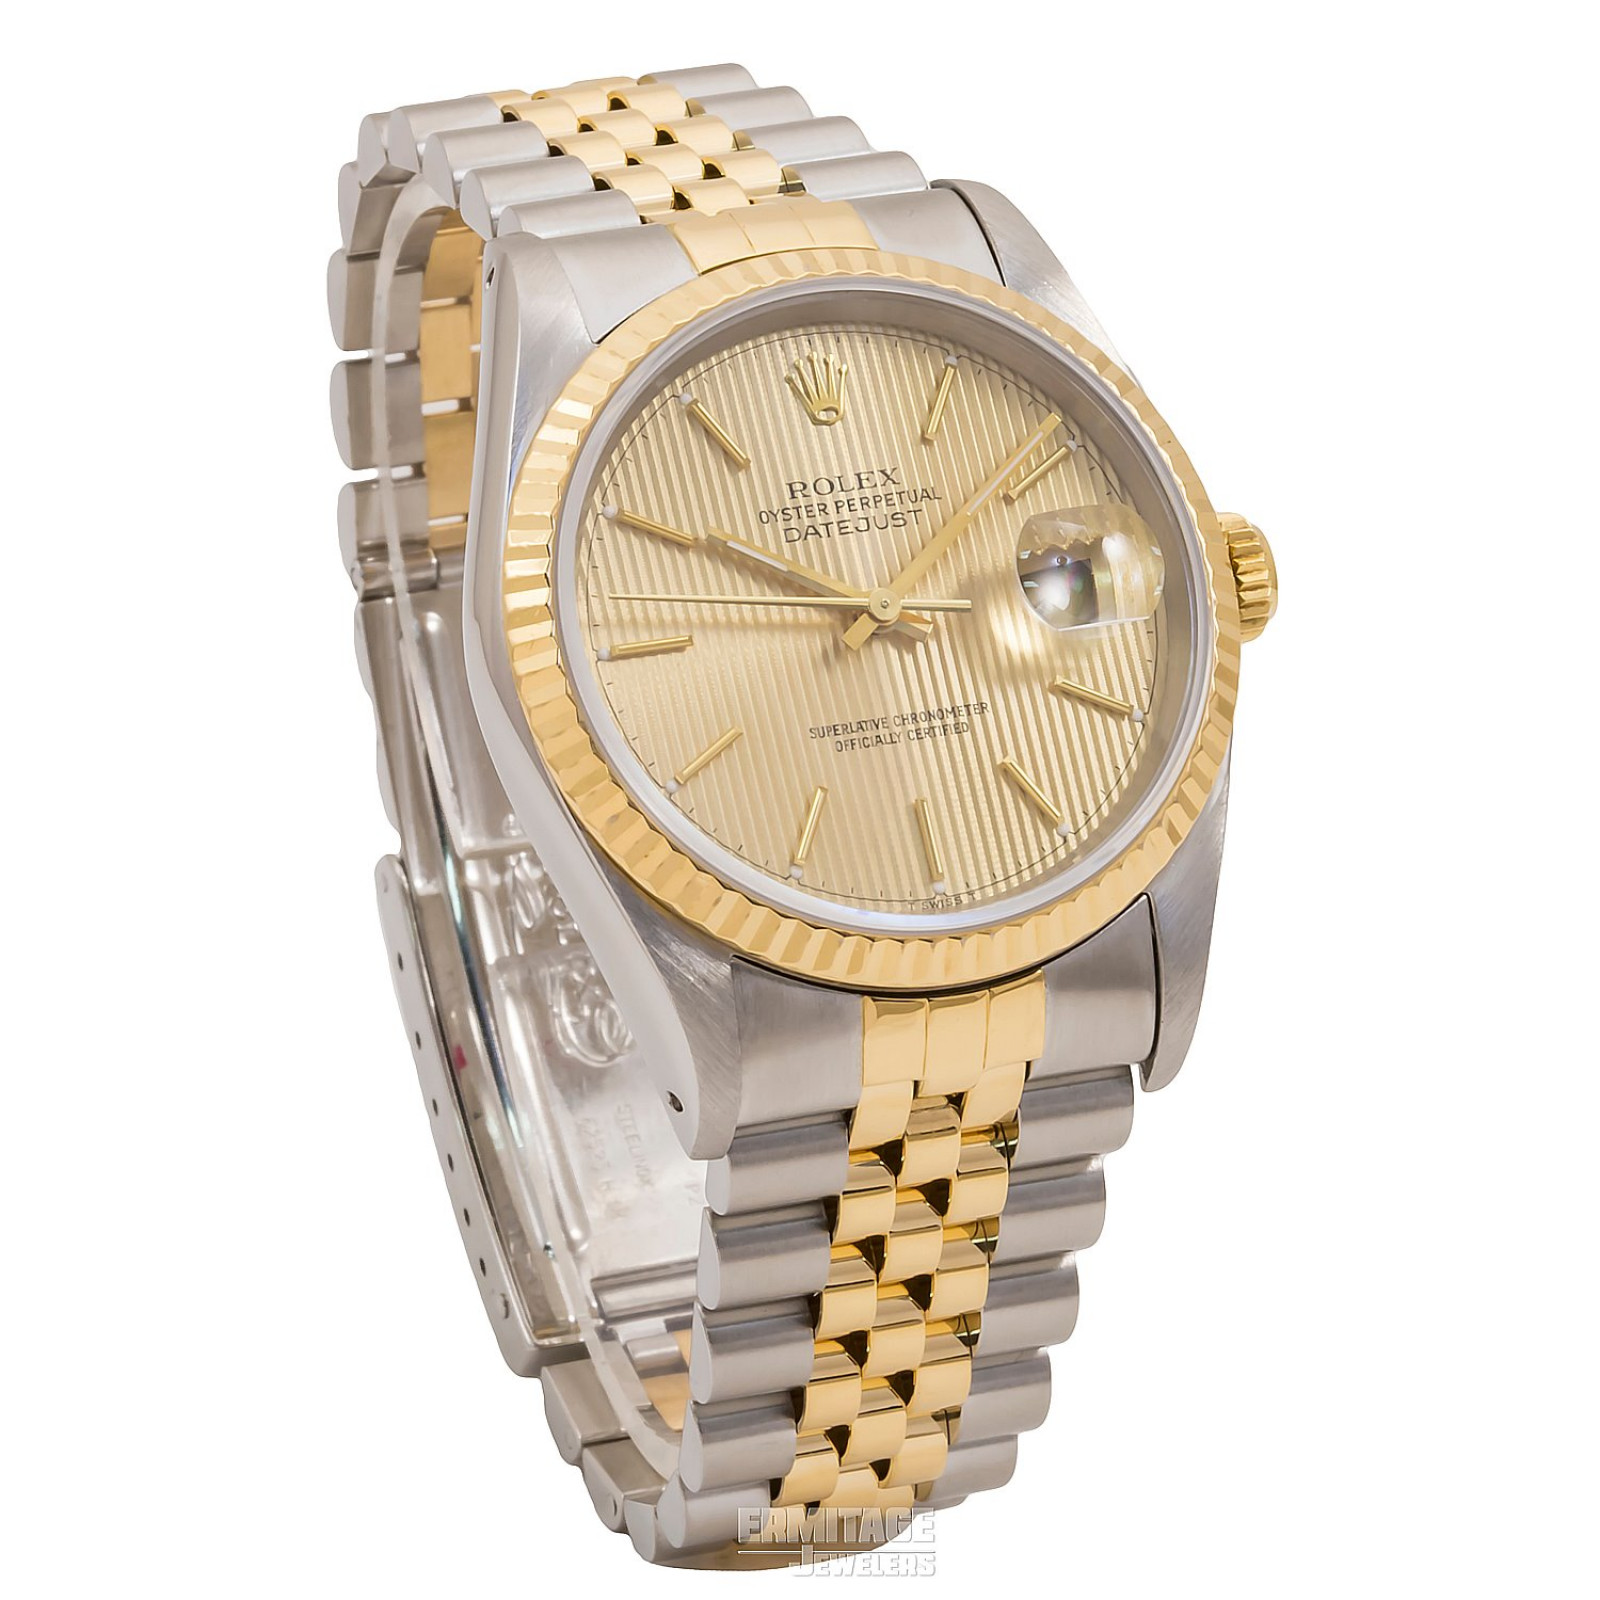 1990 Rolex Datejust Ref. 16233 with Tapestry Dial